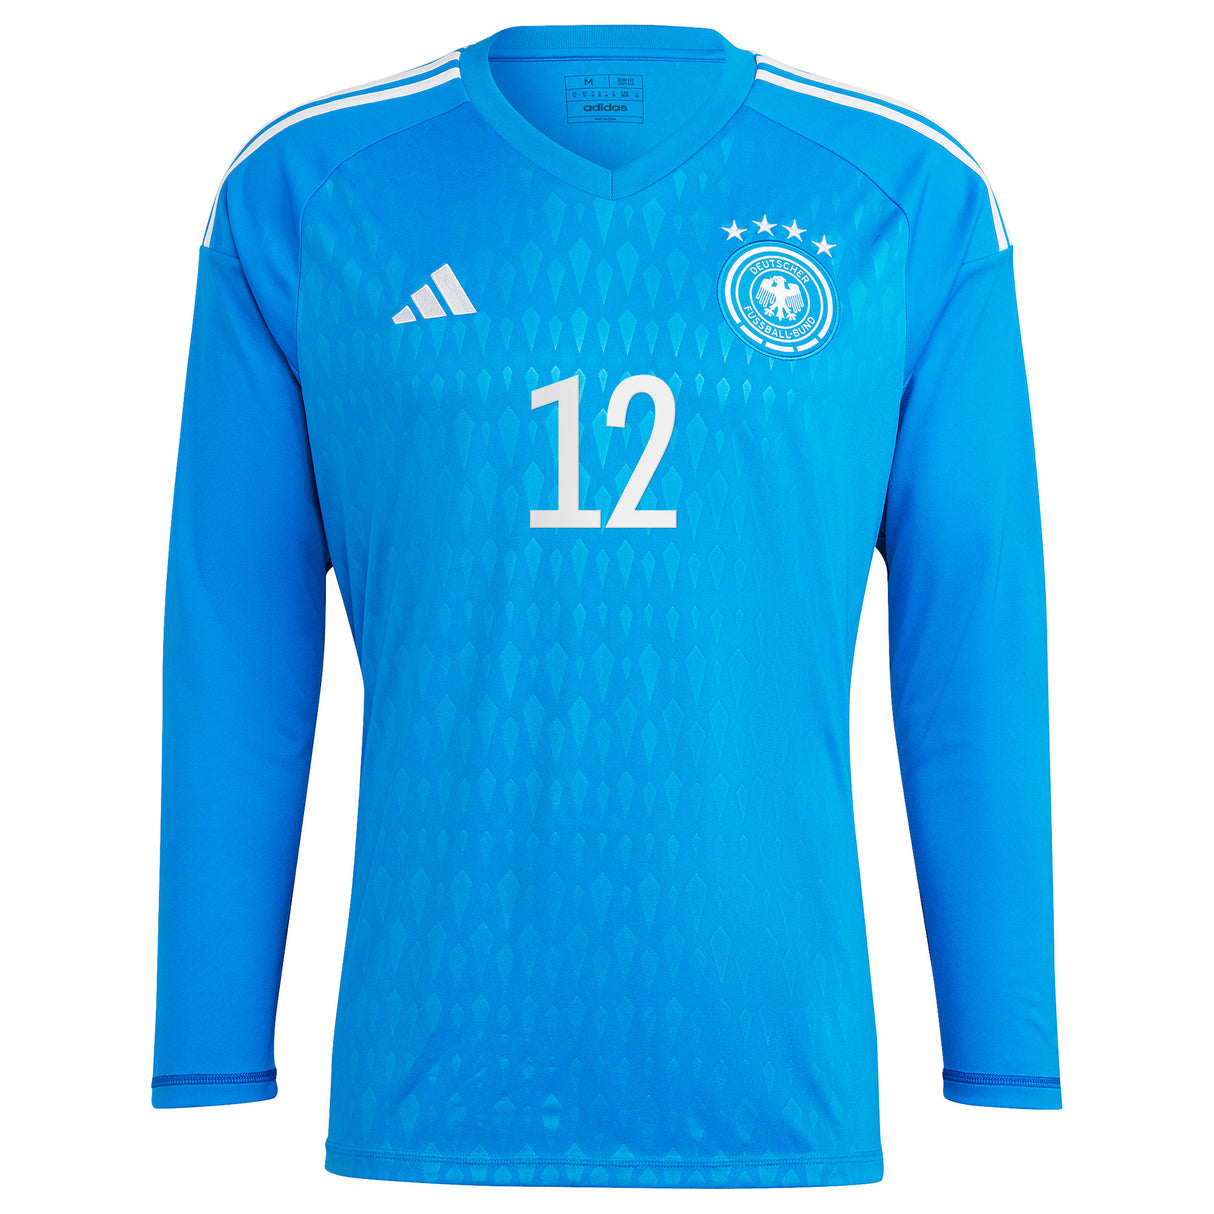 DFB Goalkeeper Shirt - Long Sleeve with Trapp 12 printing - Kit Captain